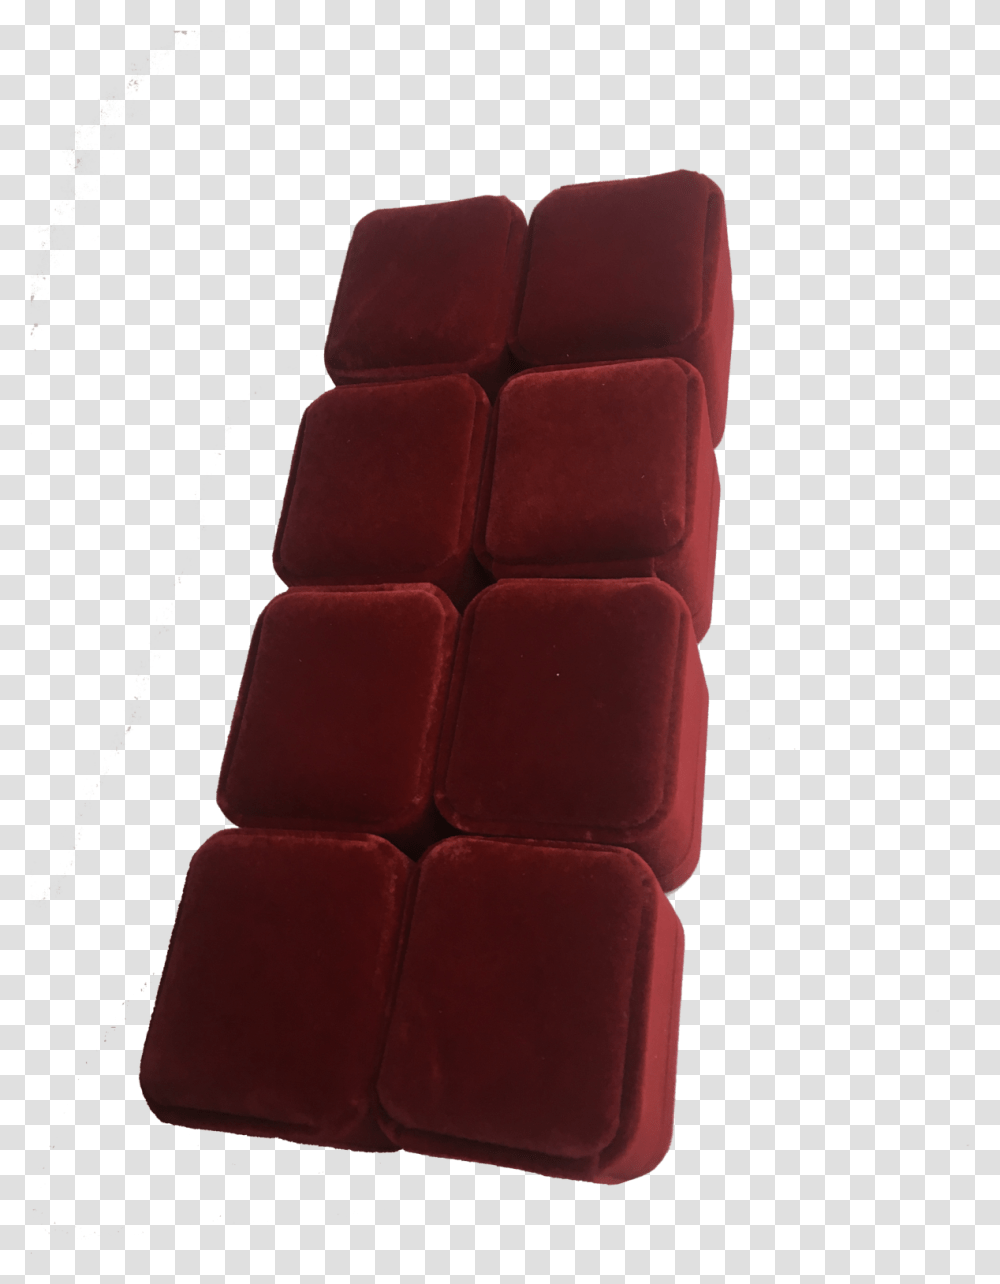 Chair, Furniture, Food, Sweets, Couch Transparent Png